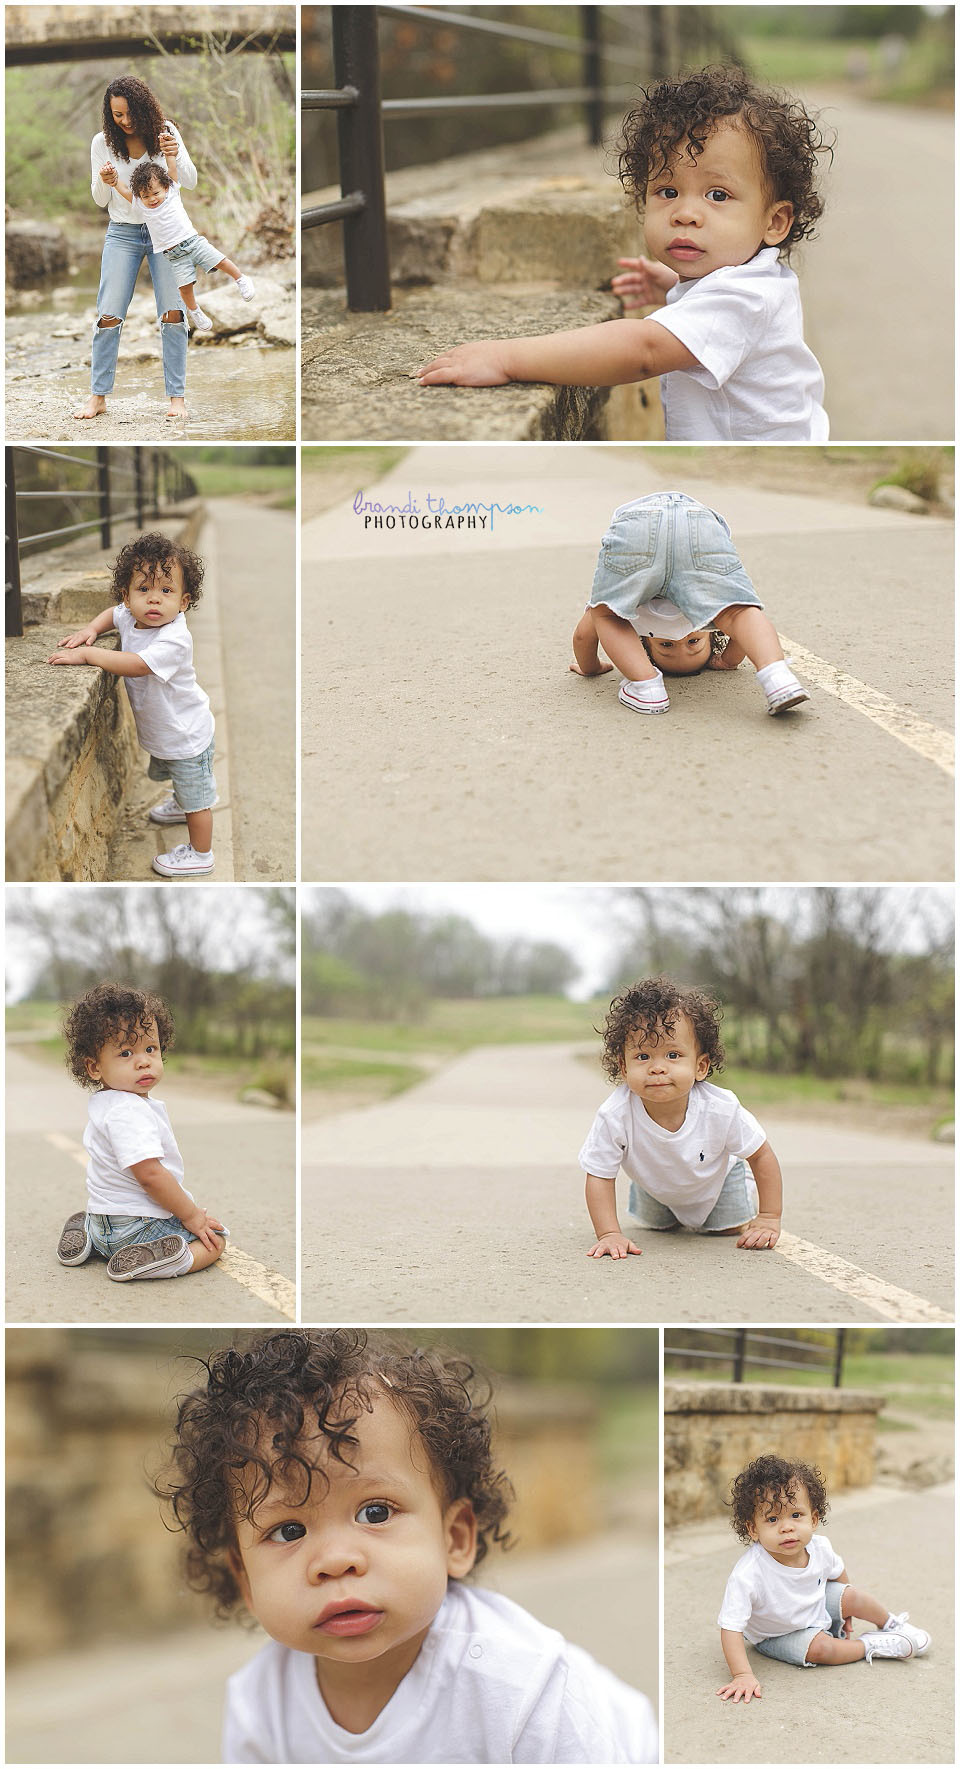 plano first birthday session, outdoor mom and son photos at arbor hills nature preserve